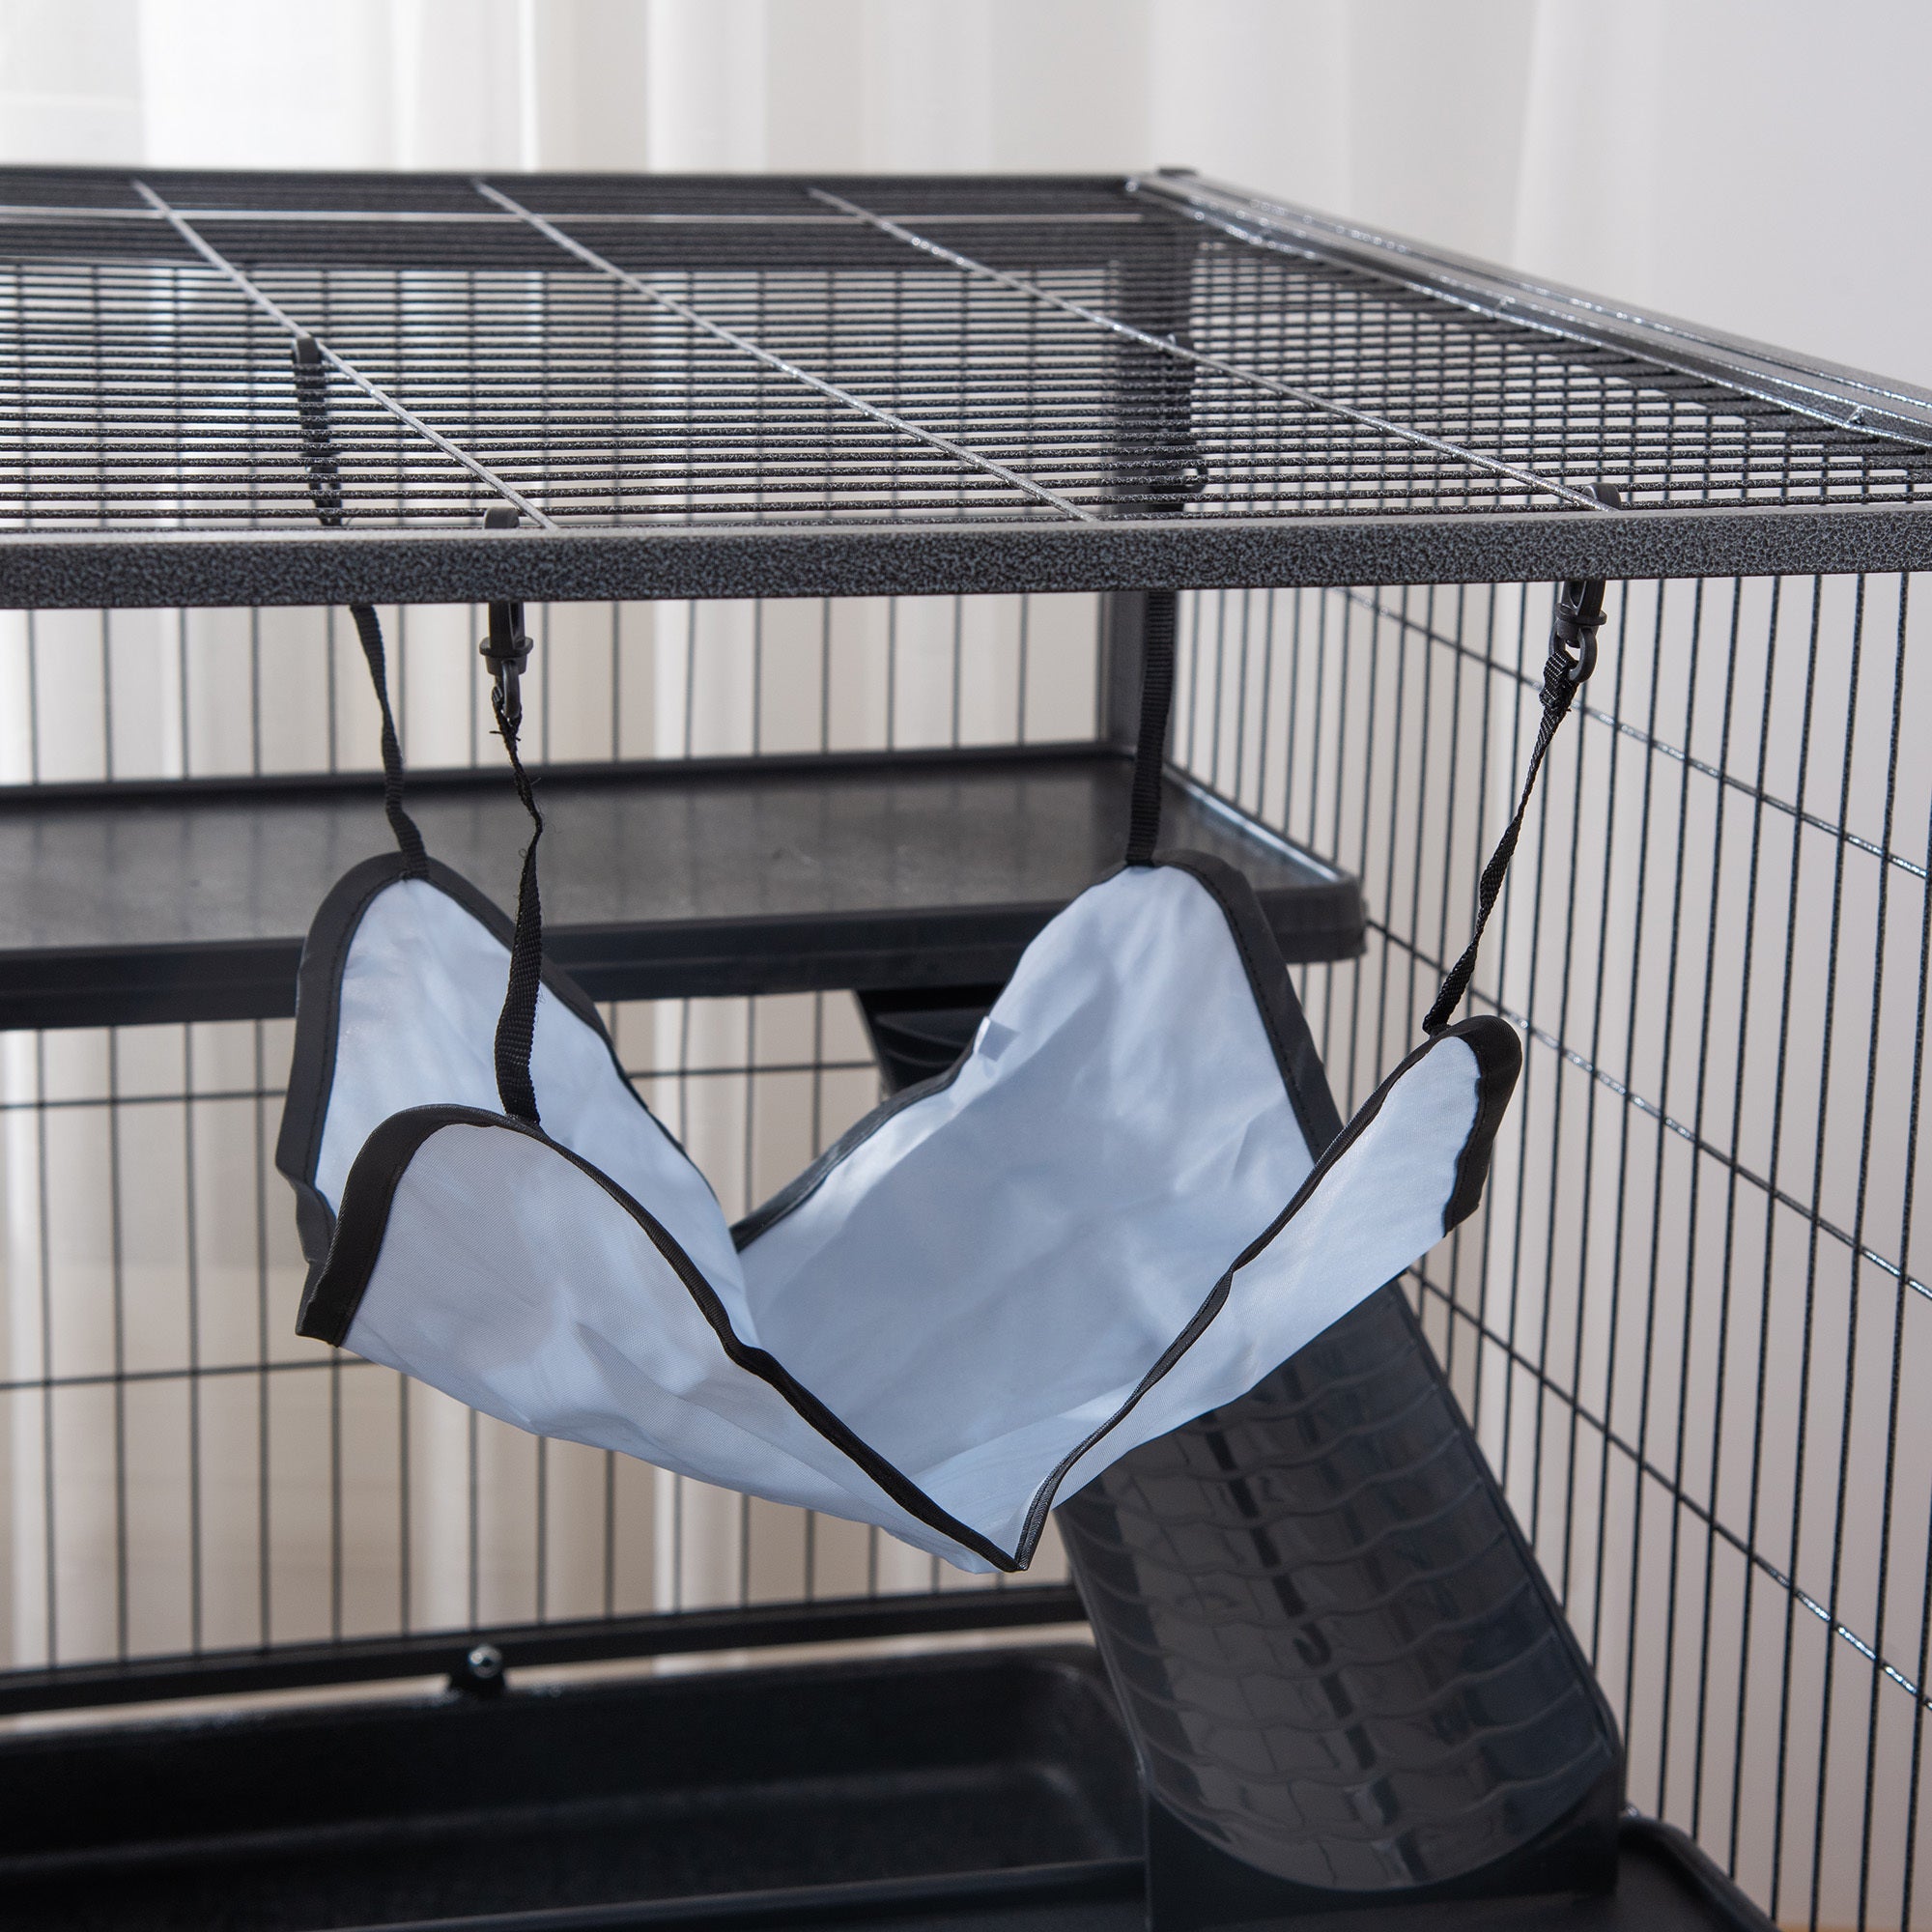 3 Tier Small Animal Cage, Ferret Cage Large